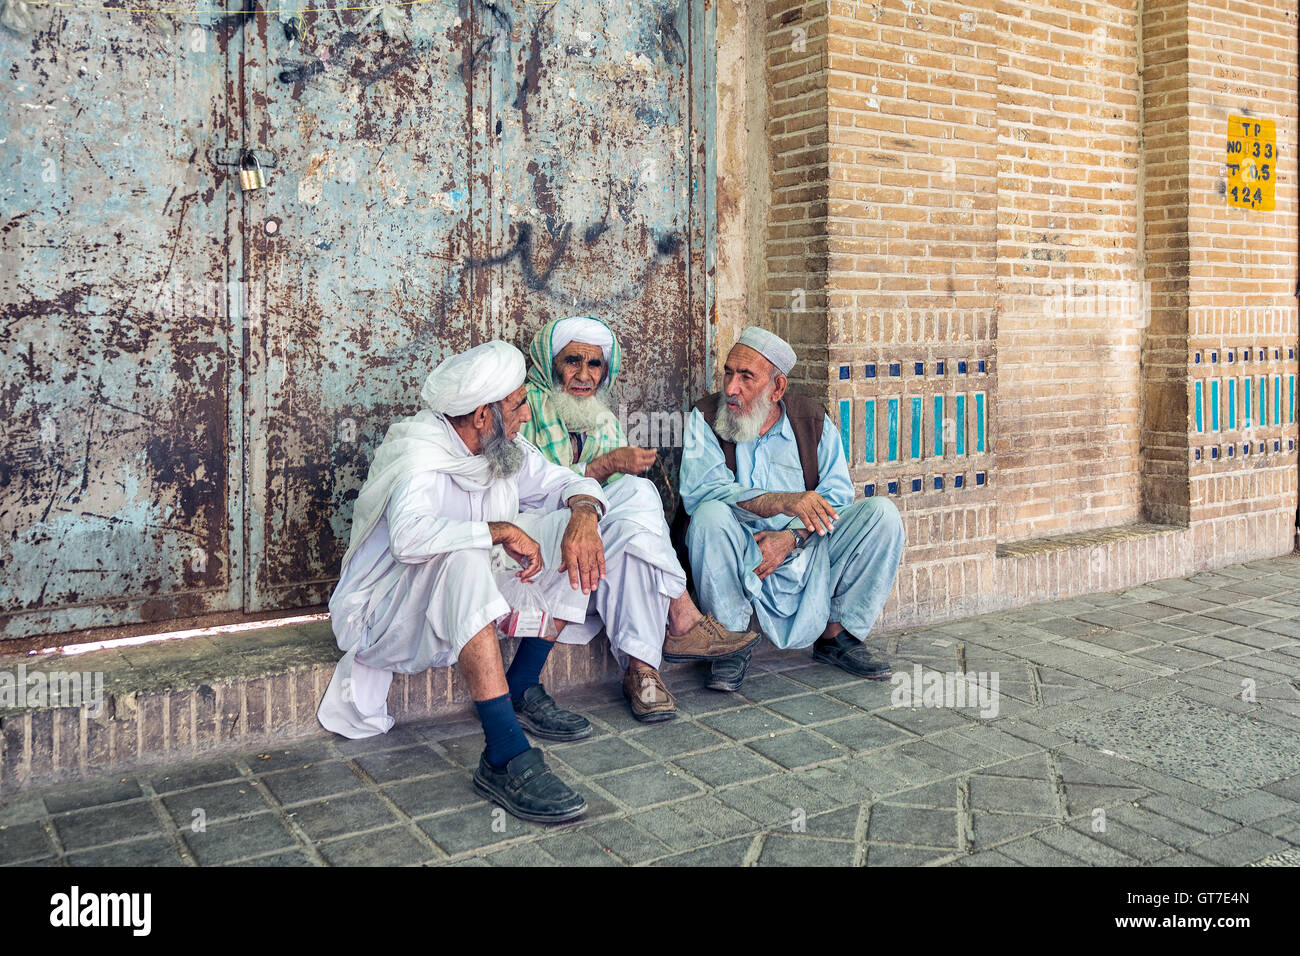 Iranian men wearing robes and turbans sitting on the sidewalk and talking in Yazd, Iran. Stock Photo